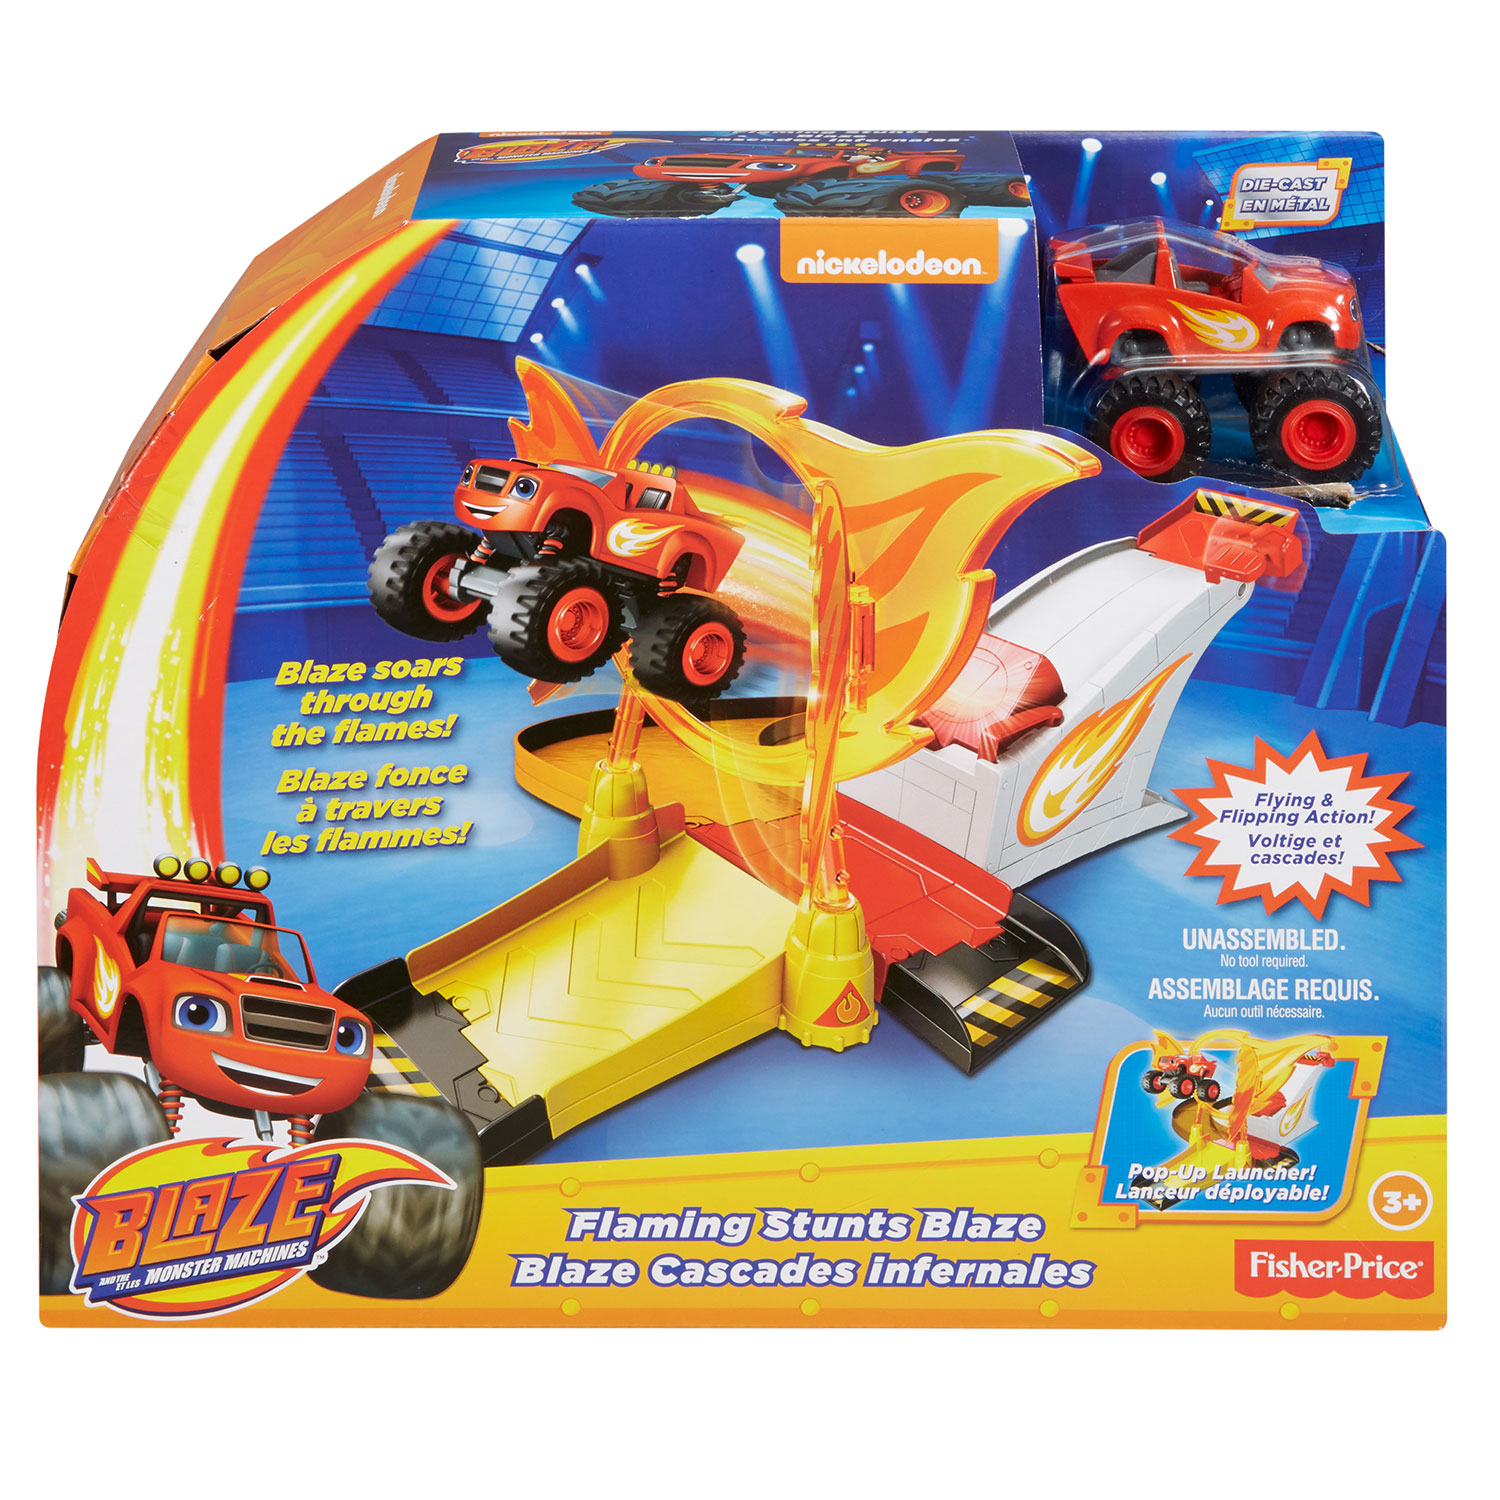 composiet Uitputten Shipley Fisher-Price Nickelodeon Blaze and the Monster wheels-Blaze &amp; | Thimble  Toys